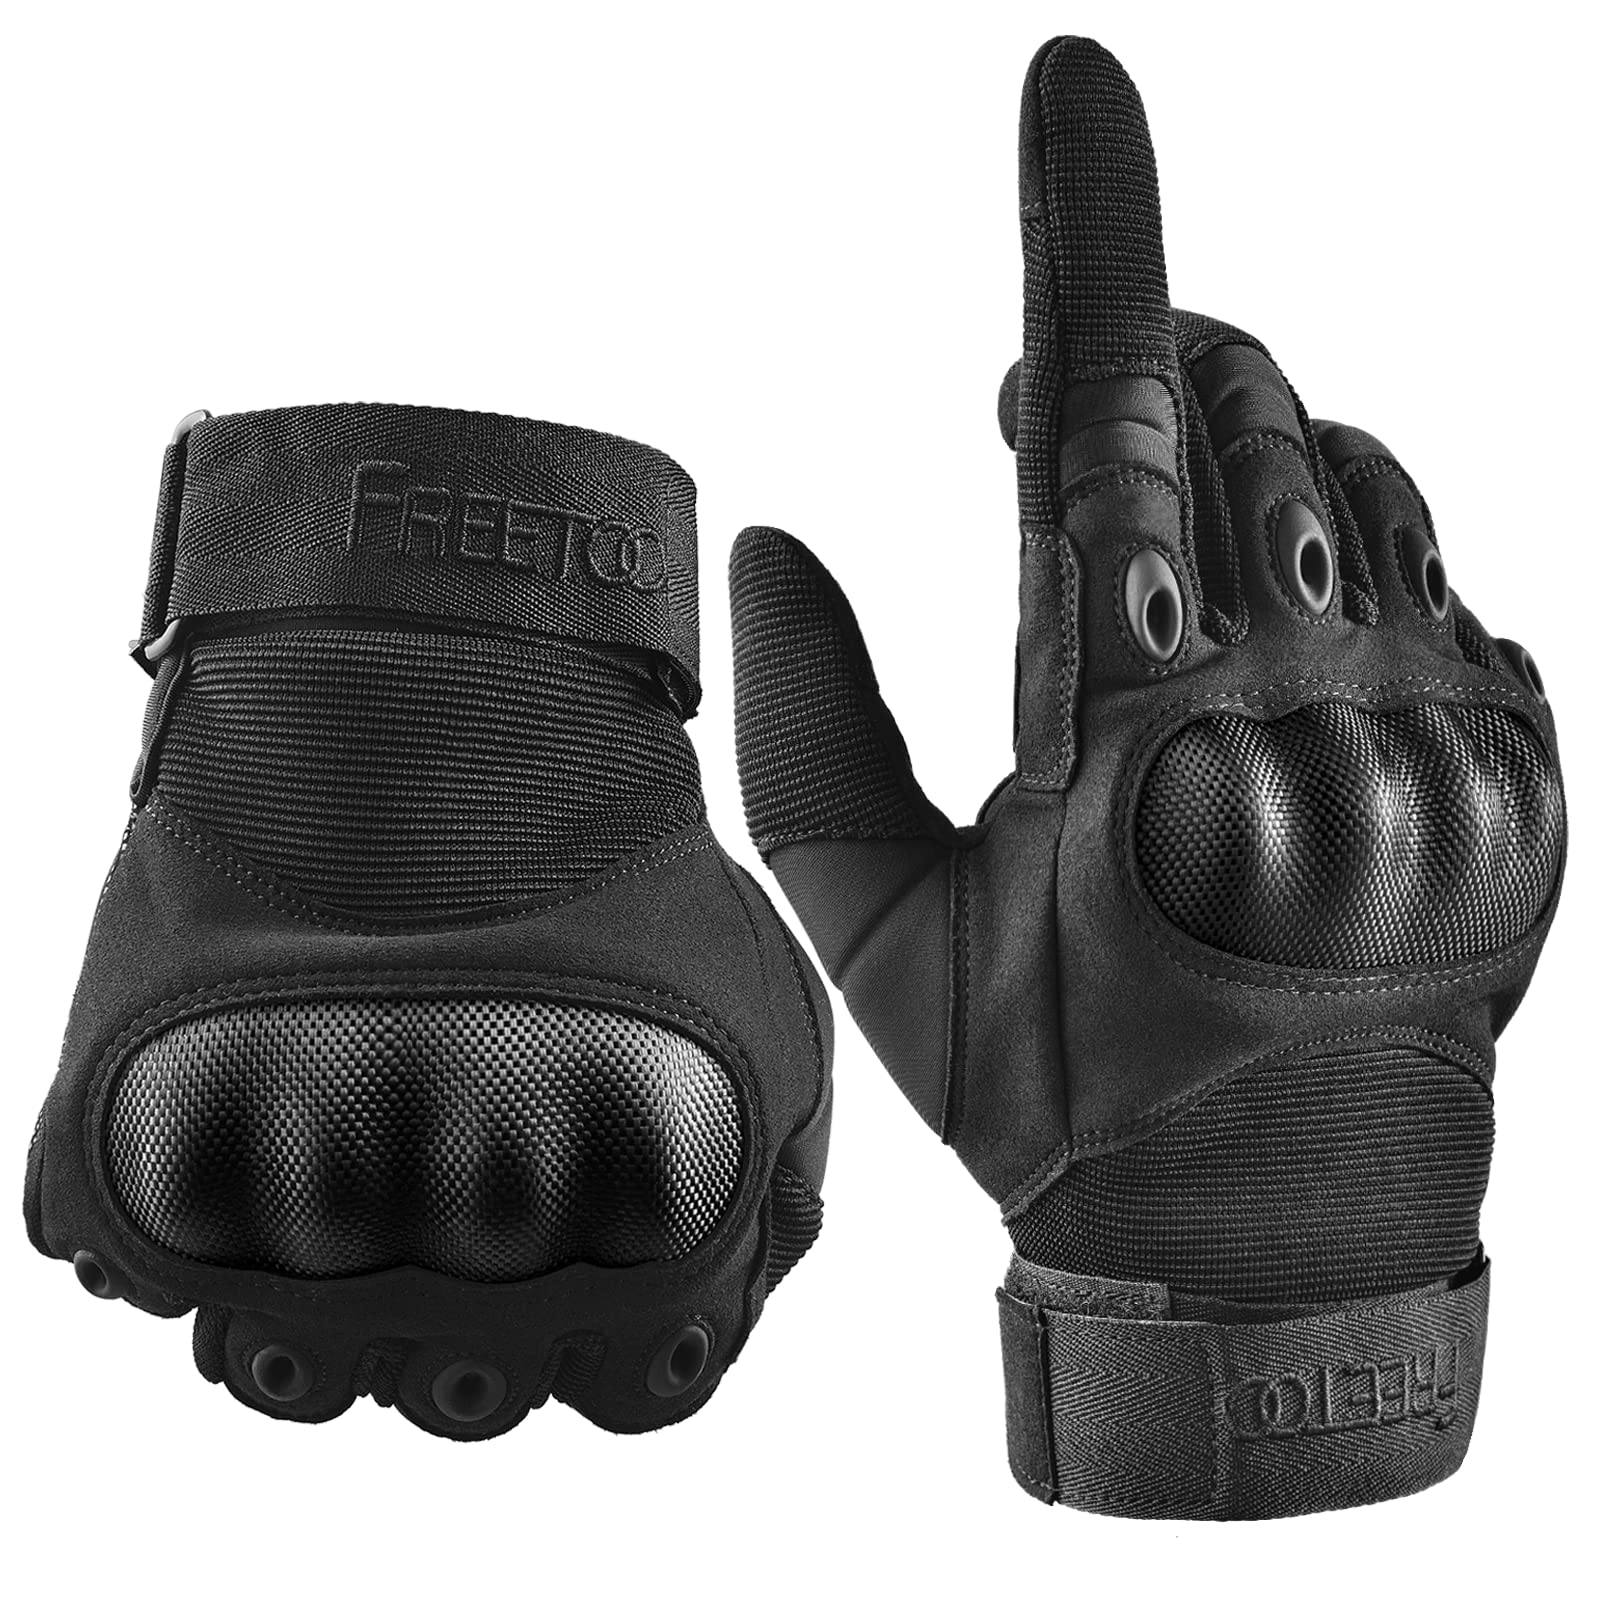 FREETOO Work Gloves Men Protection Gloves for Hiking Cycling